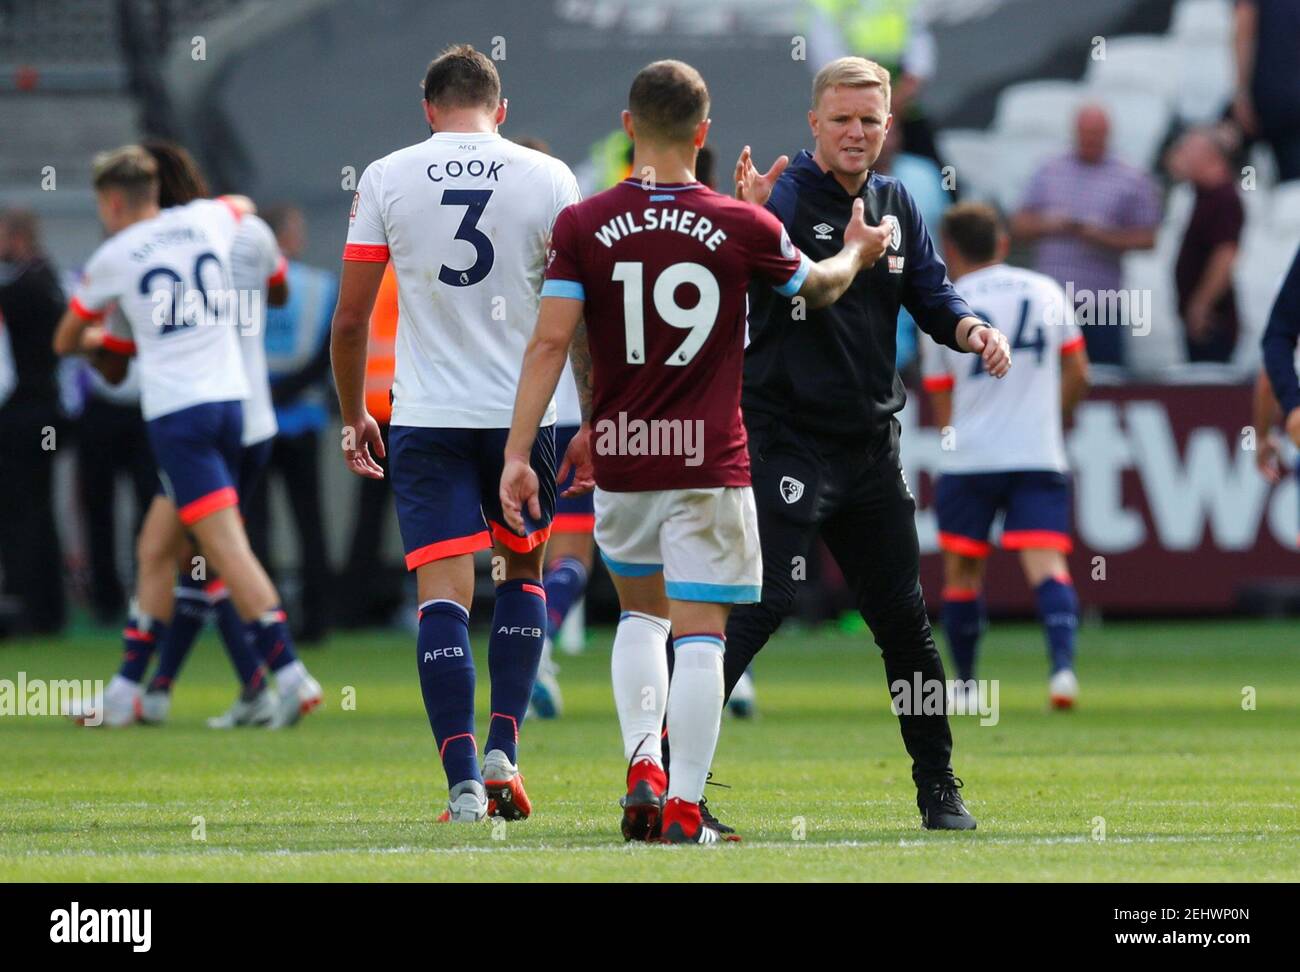 Soccer Football - Premier League - West Ham United v AFC Bournemouth - London Stadium, London, Britain - August 18, 2018   Bournemouth manager Eddie Howe shakes the hand of West Ham's Jack Wilshere after the match          REUTERS/Eddie Keogh    EDITORIAL USE ONLY. No use with unauthorized audio, video, data, fixture lists, club/league logos or 'live' services. Online in-match use limited to 75 images, no video emulation. No use in betting, games or single club/league/player publications.  Please contact your account representative for further details. Stock Photo